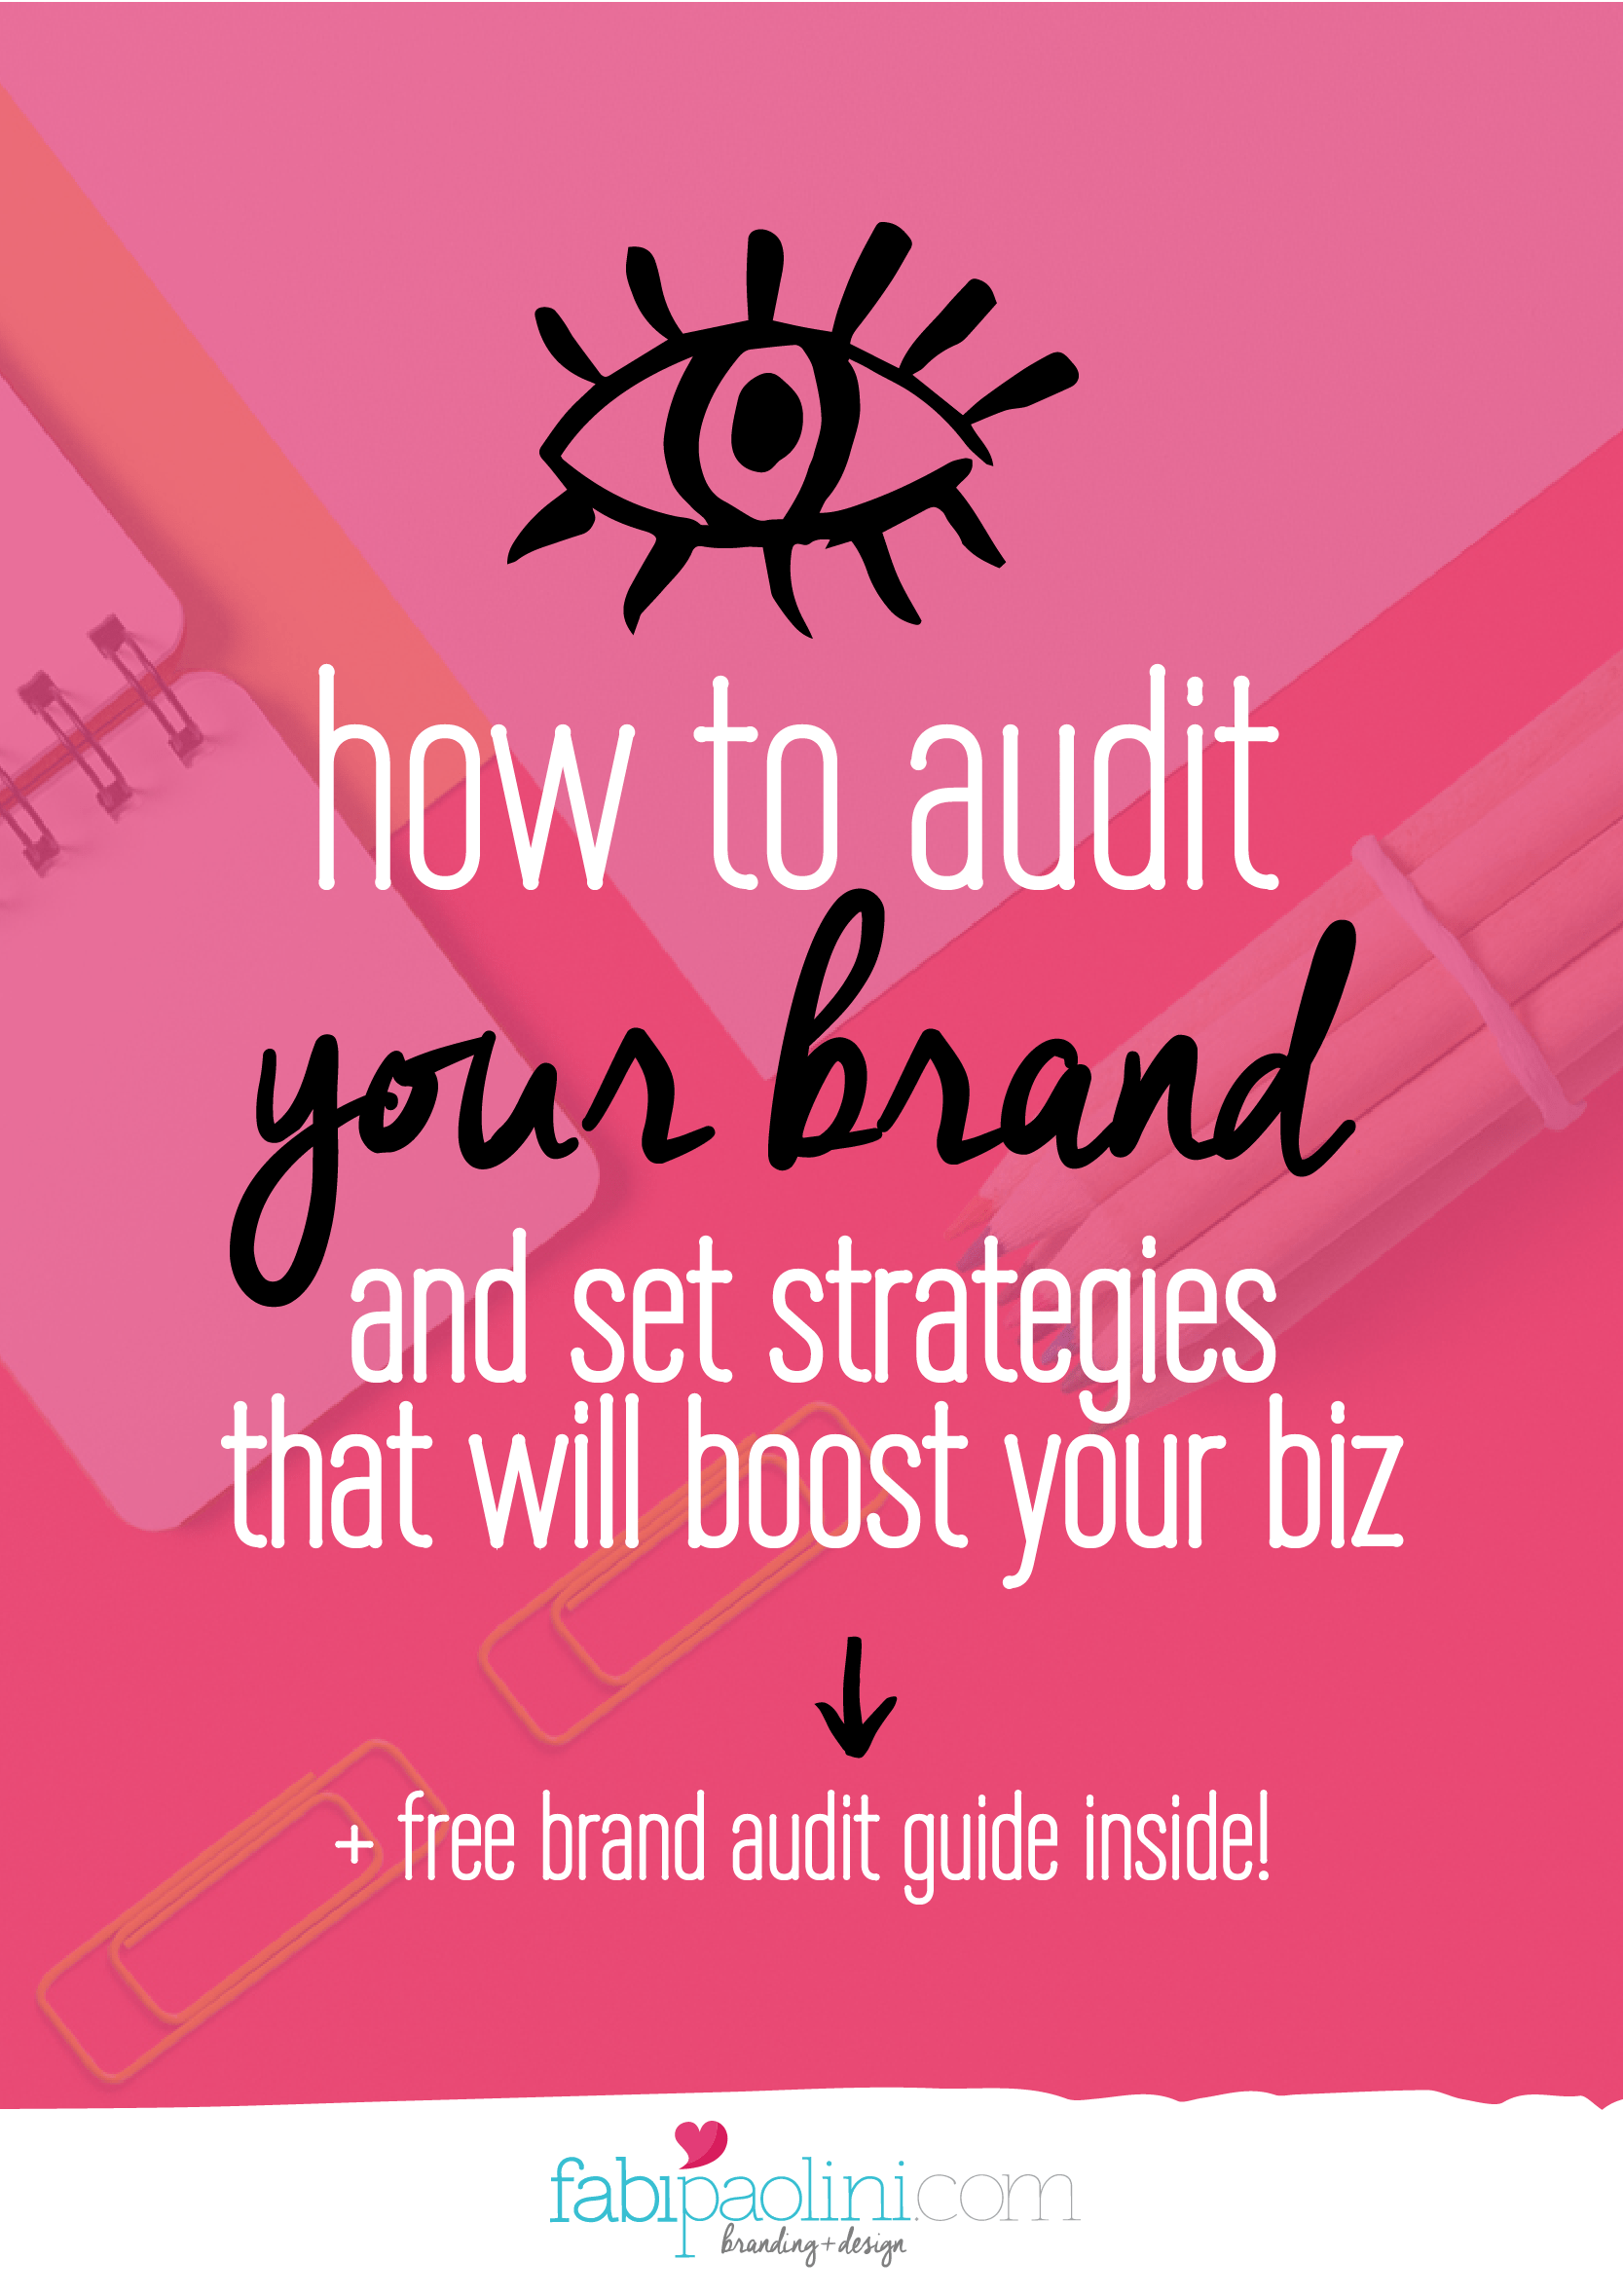 How to audit your brand and set strategies that will boost your business. Check out the free guide inside!